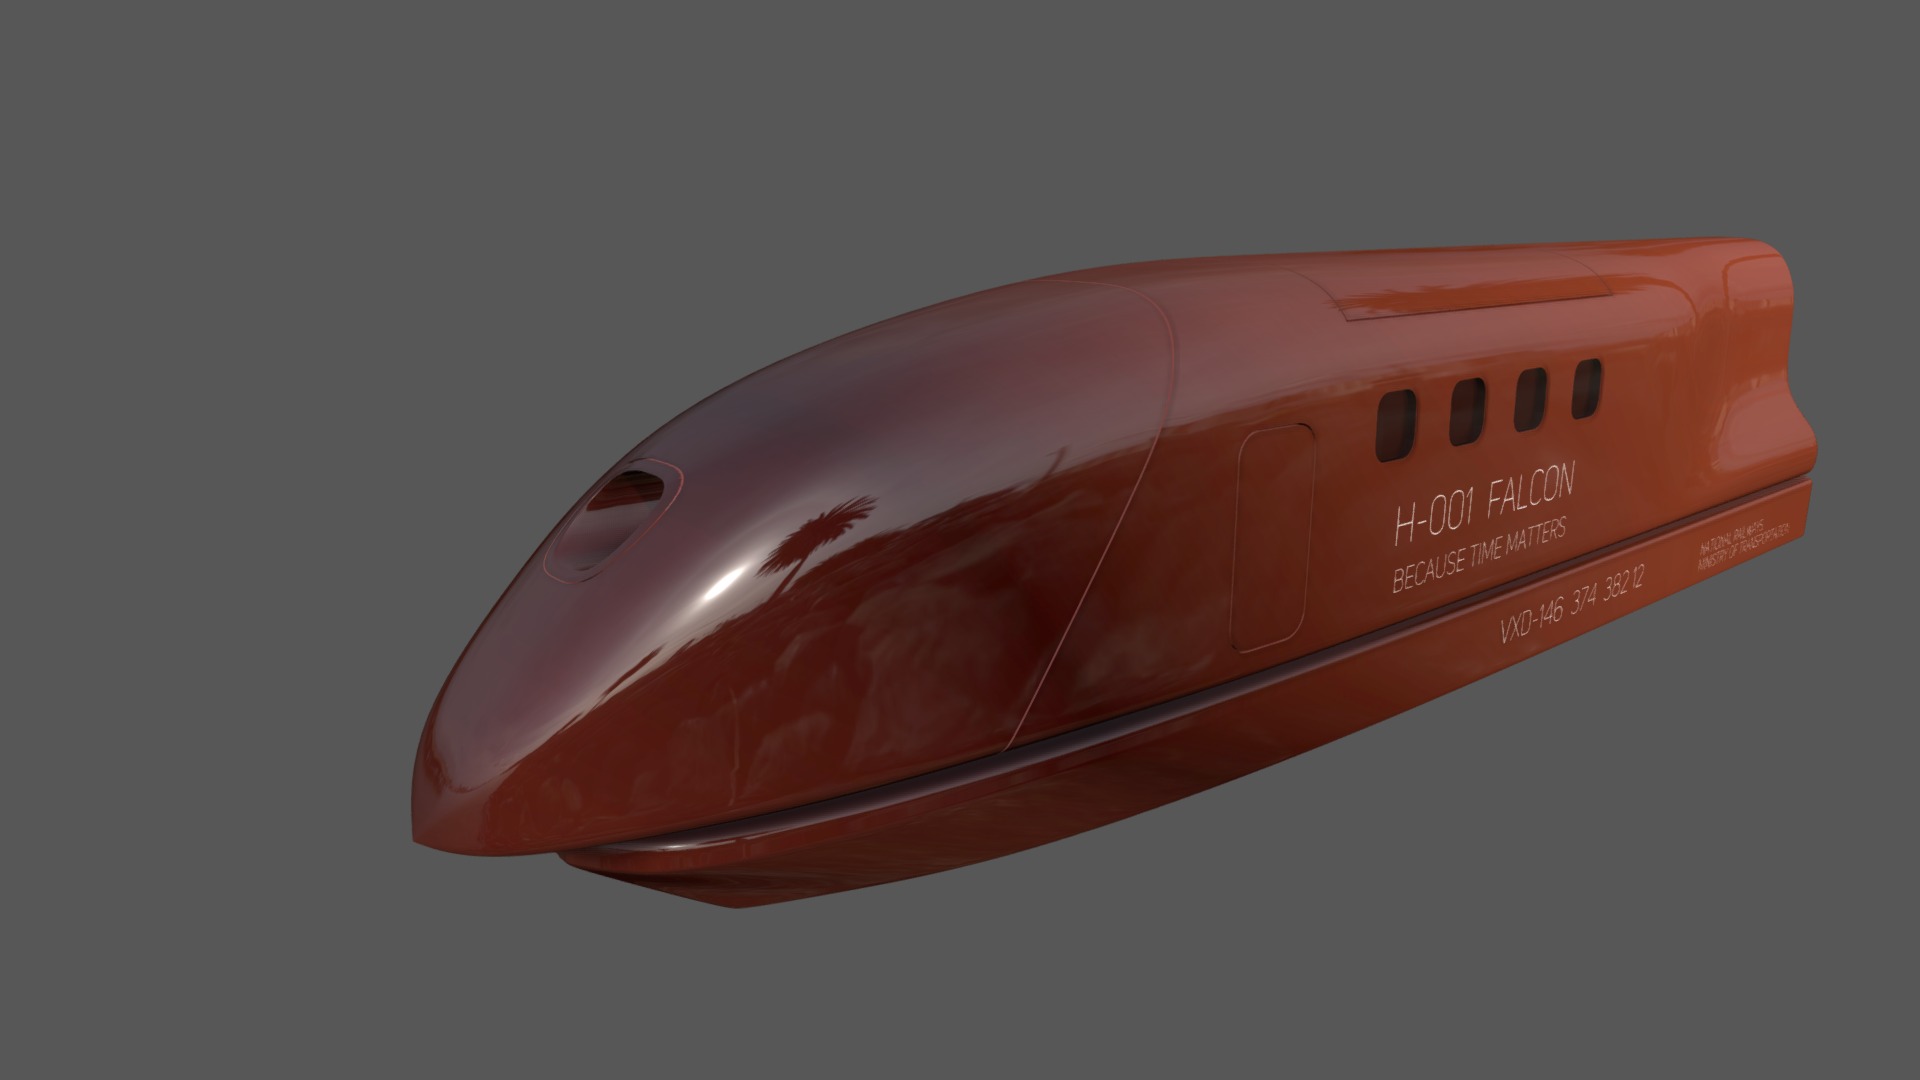 3D model Hyperloop A-001 - This is a 3D model of the Hyperloop A-001. The 3D model is about a red rectangular object.